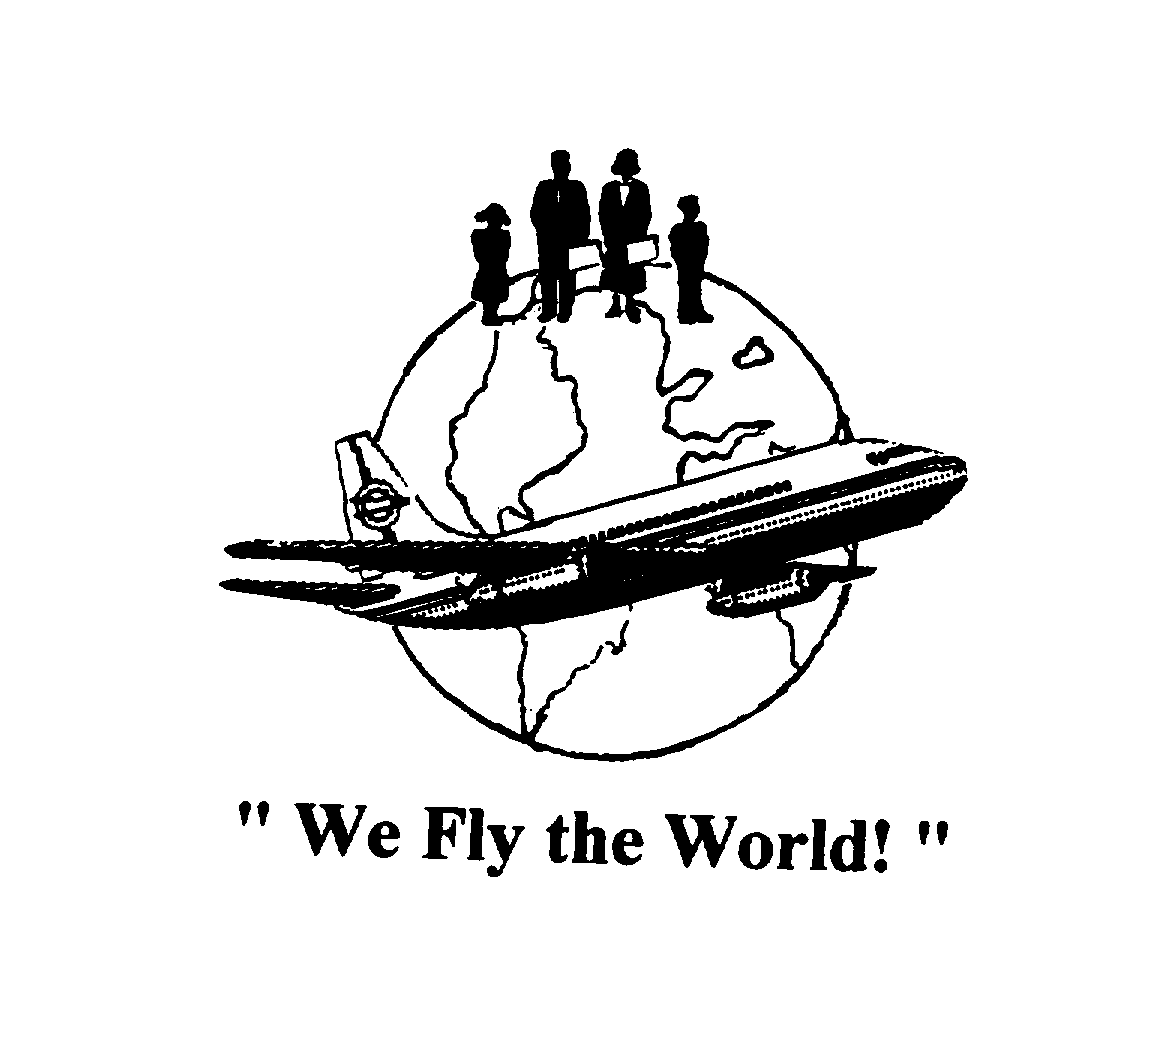  "WE FLY THE WORLD!"